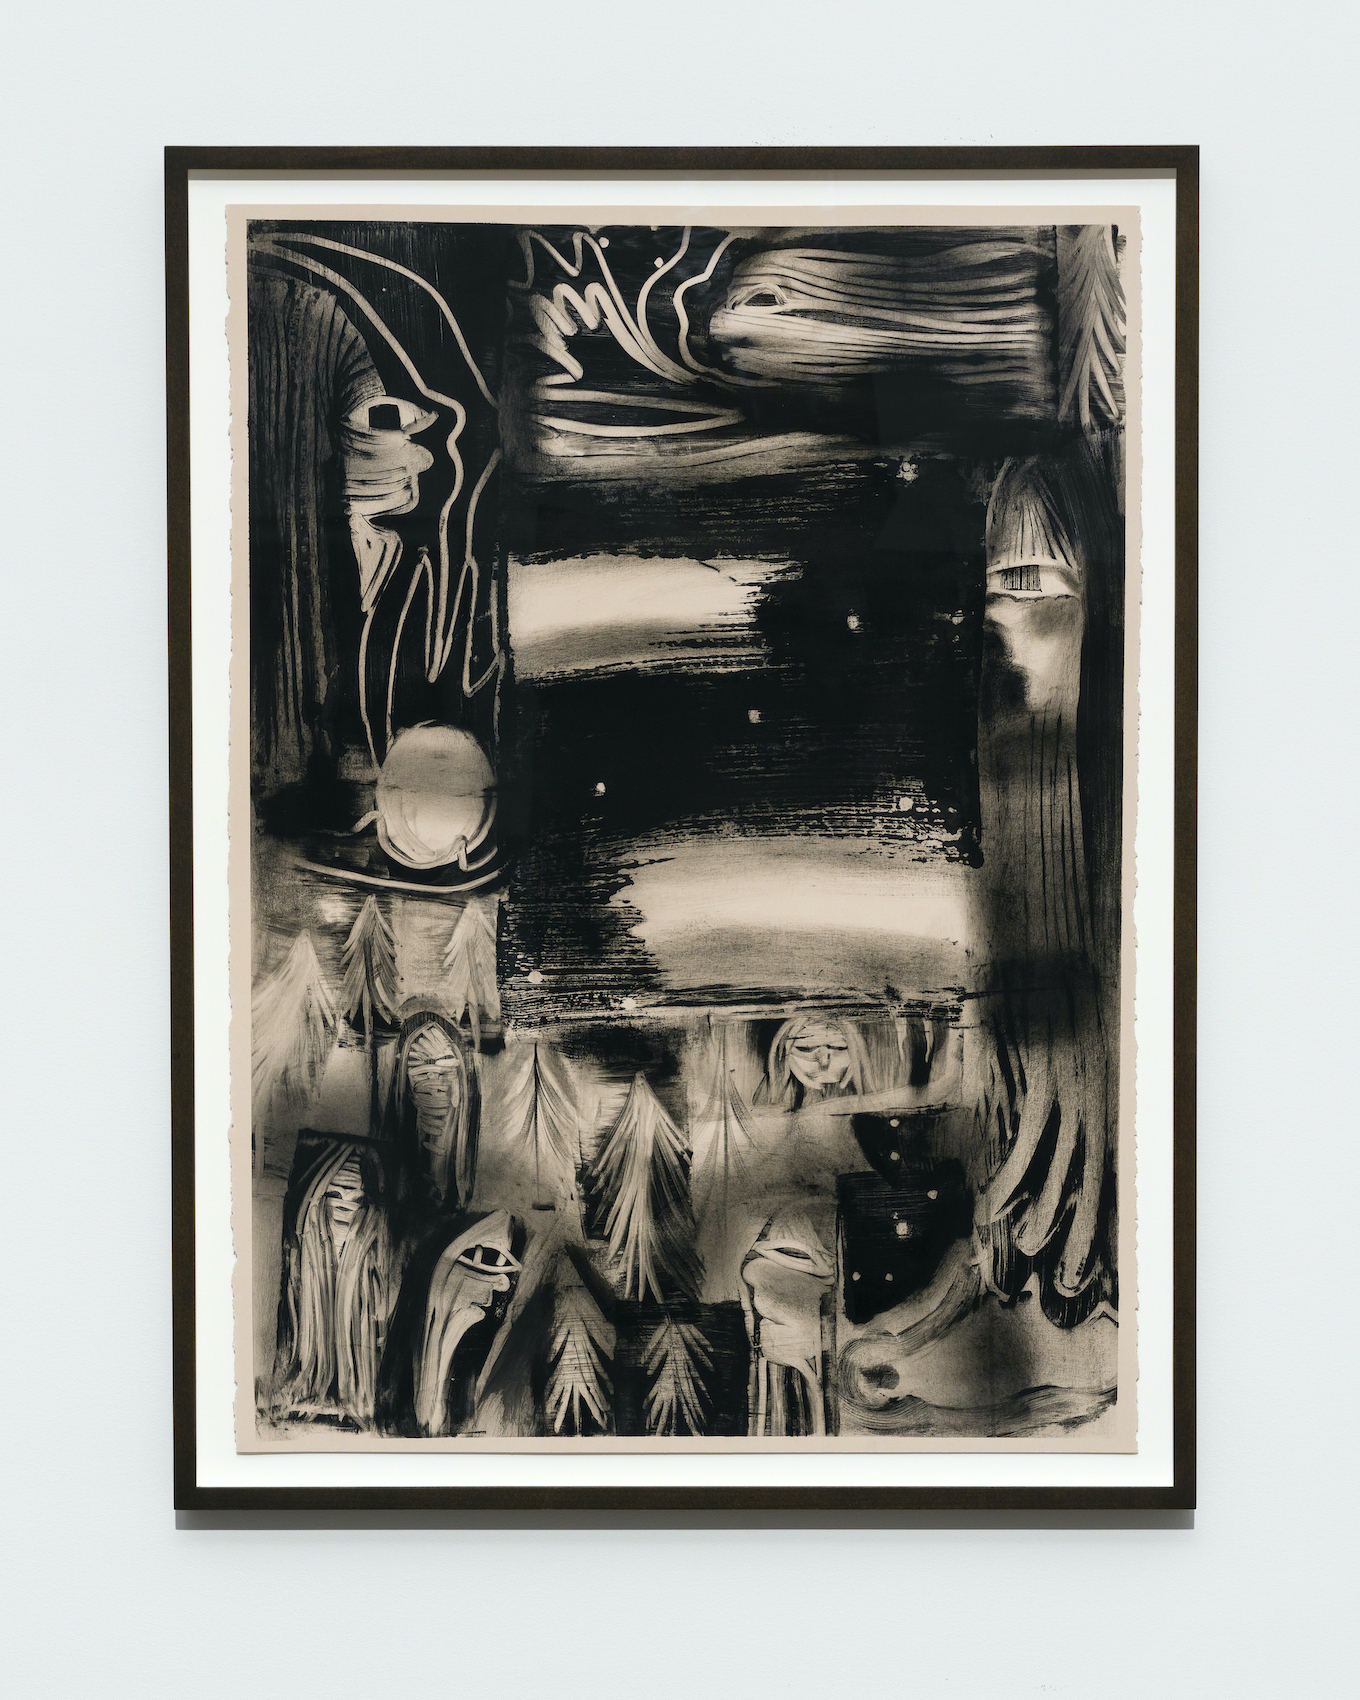 Bea Parsons, Space Jam, 2022, Monotype on Stonehenge paper, 30 x 22 inches, edition 1/1